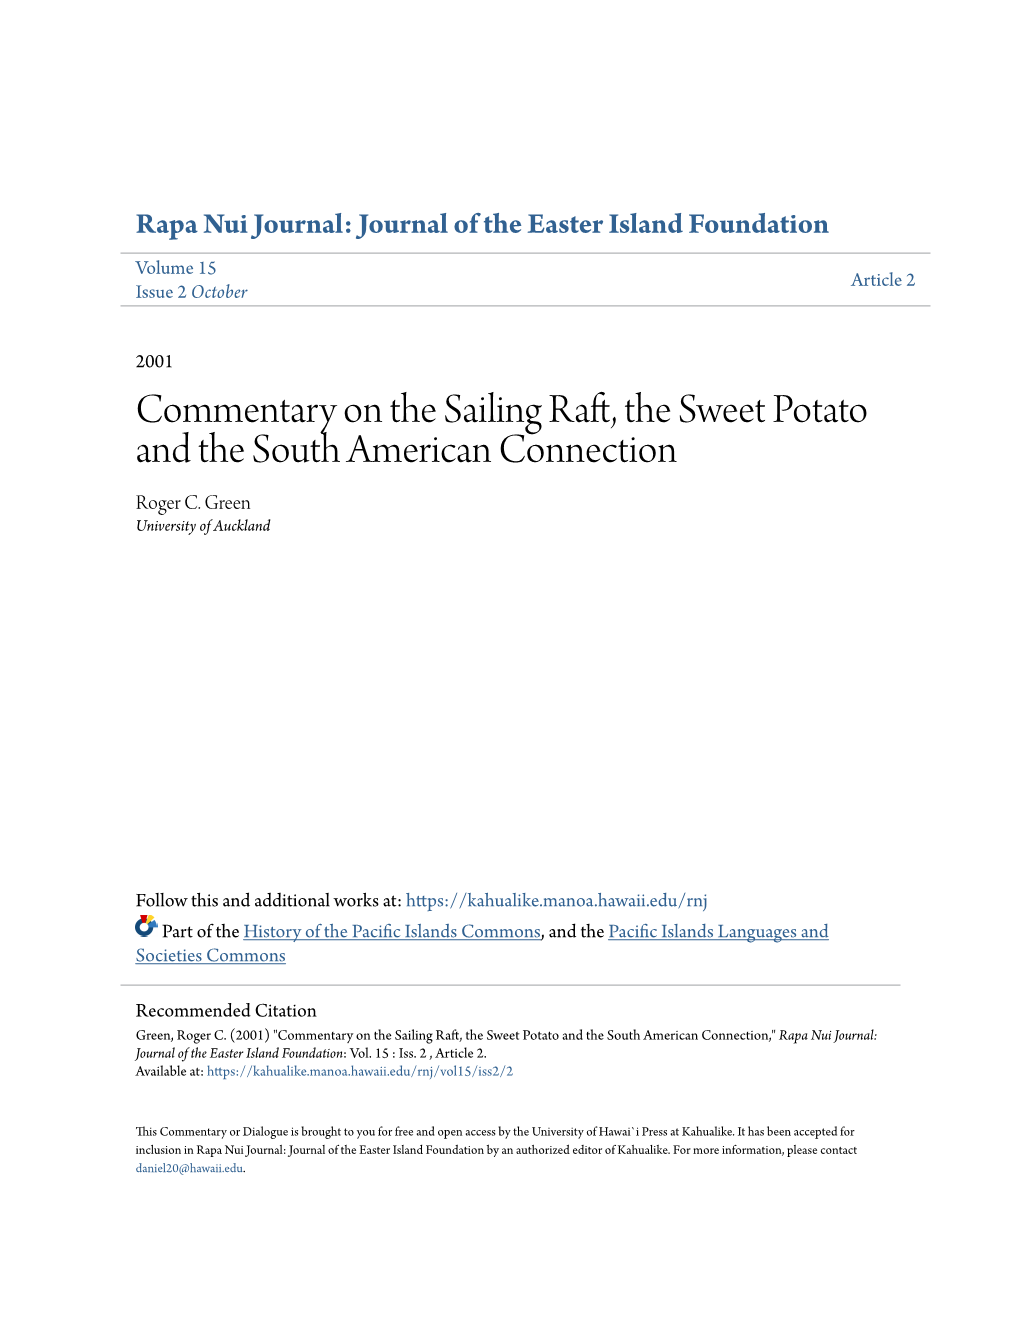 Commentary on the Sailing Raft, the Sweet Potato and the South American Connection Roger C